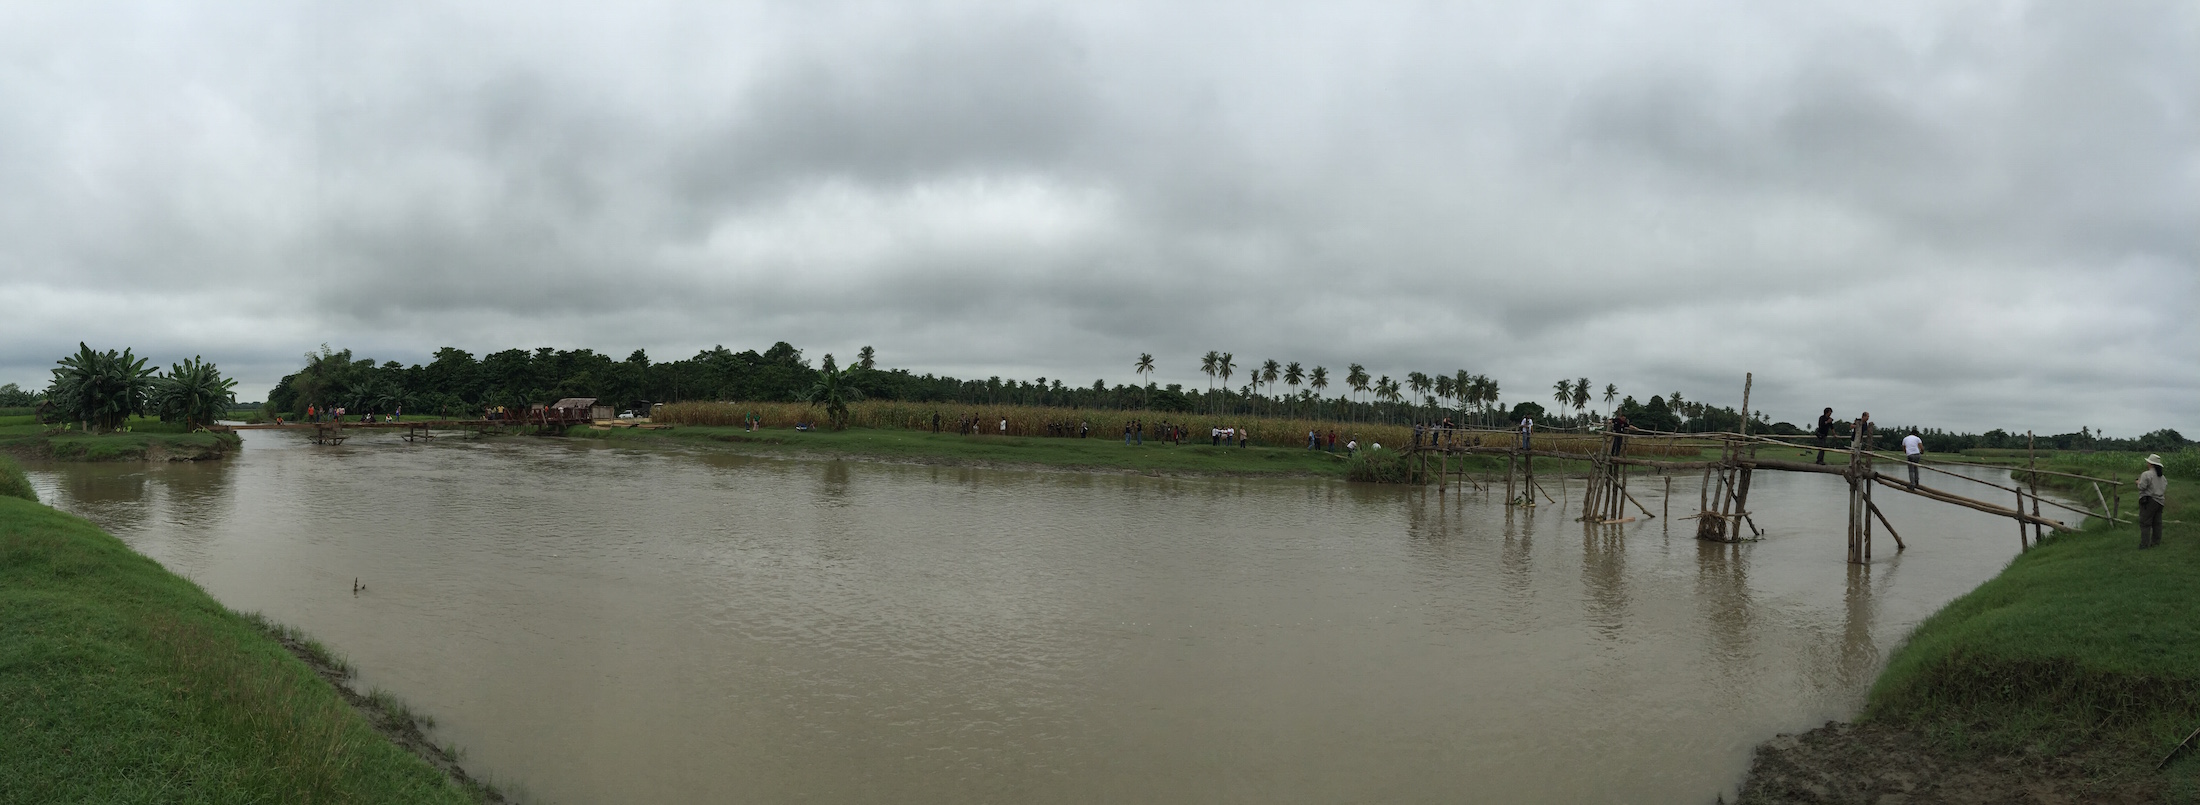 Panoramic shot of Mamasapano, showing the new bridge on the left and the old one on the right. Photo by JAKE SORIANO